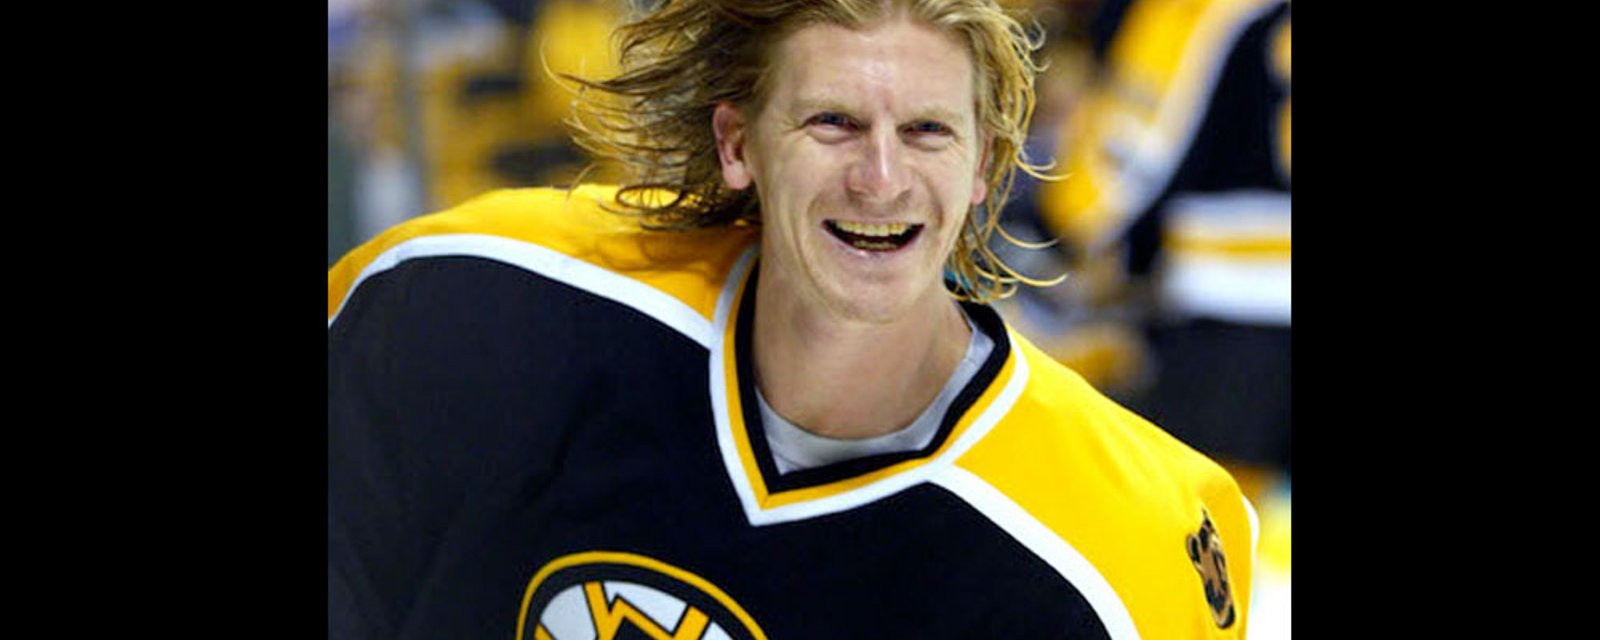 Former Bruins forward PJ Axelsson surprised to find out he’s a hair model in… Bolivia?